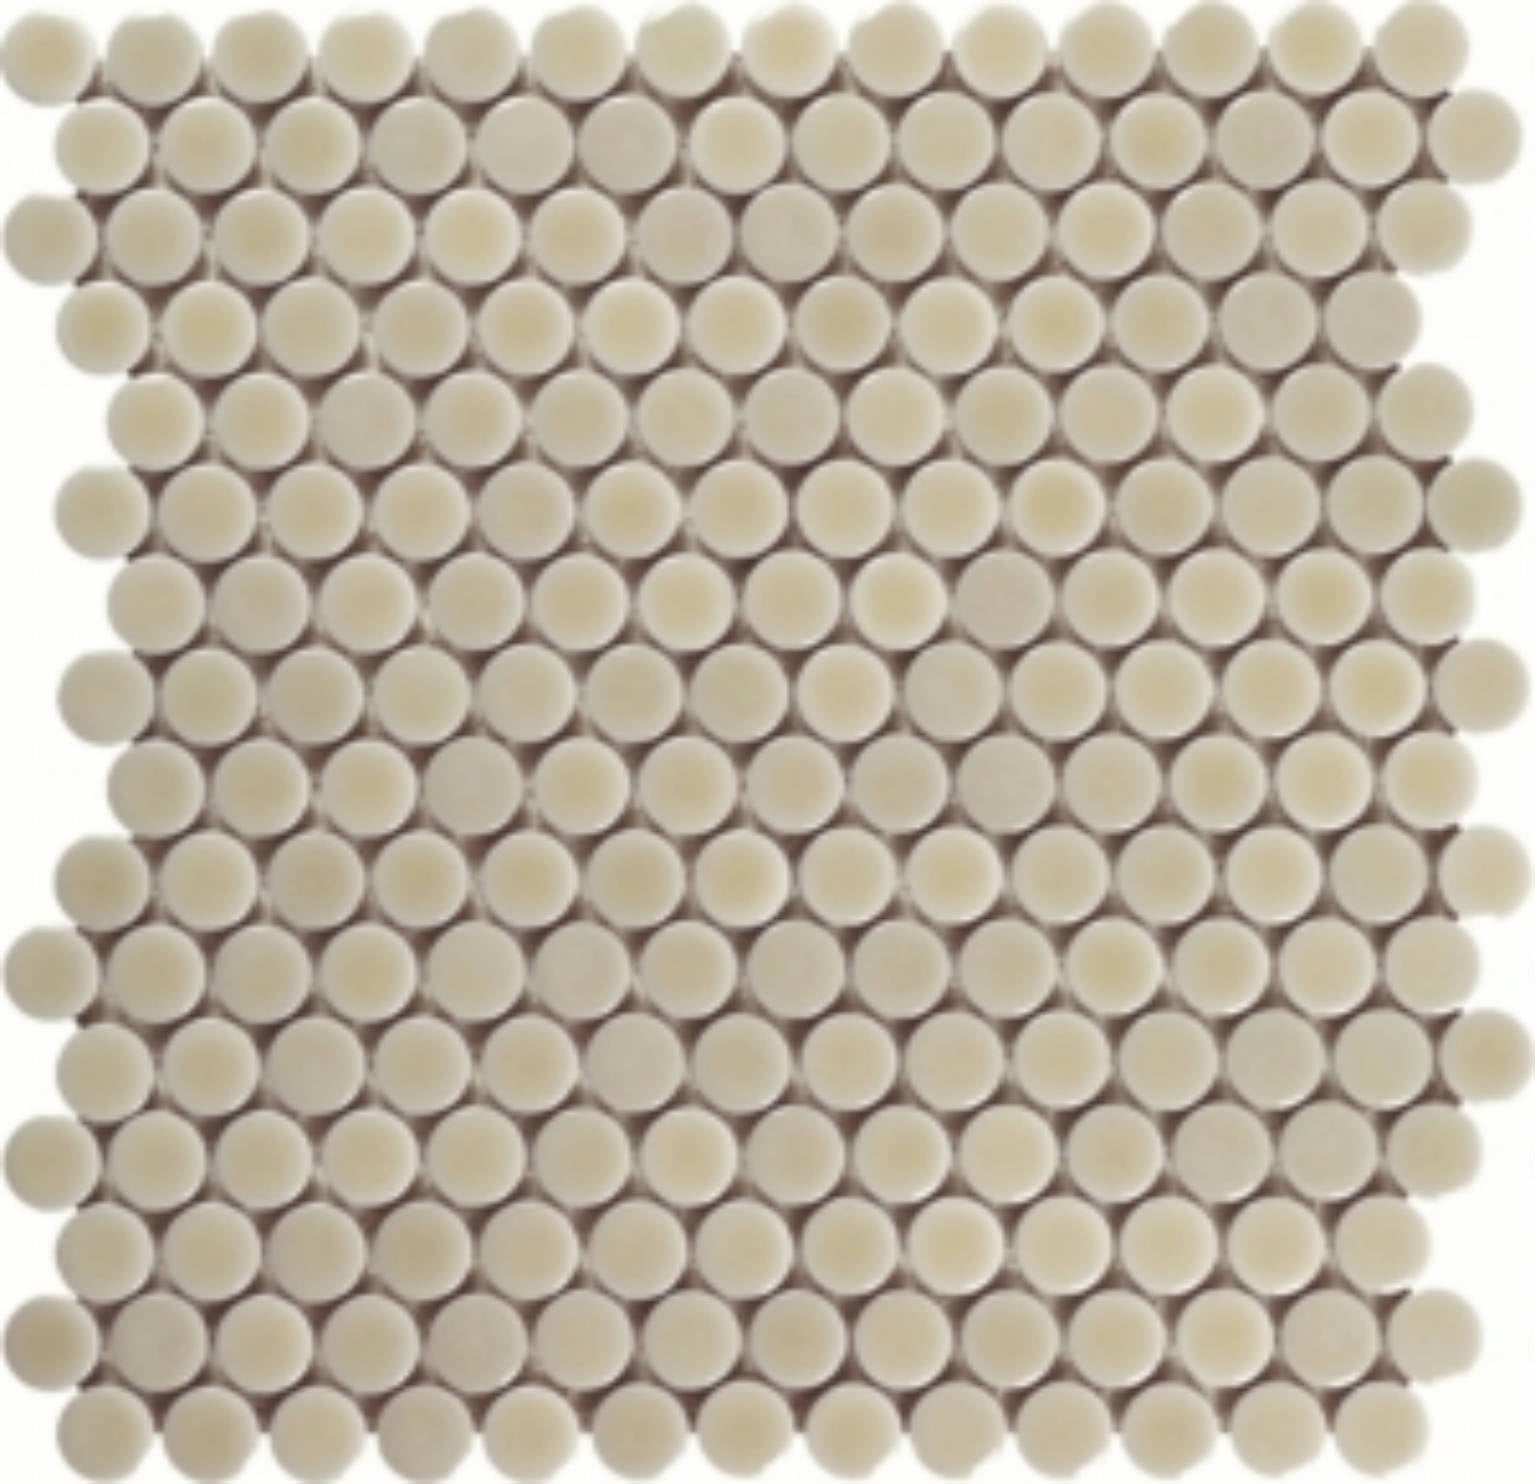 Mosaic Sandstone 1-Inch Penny Rounds Pattern (12"x12")